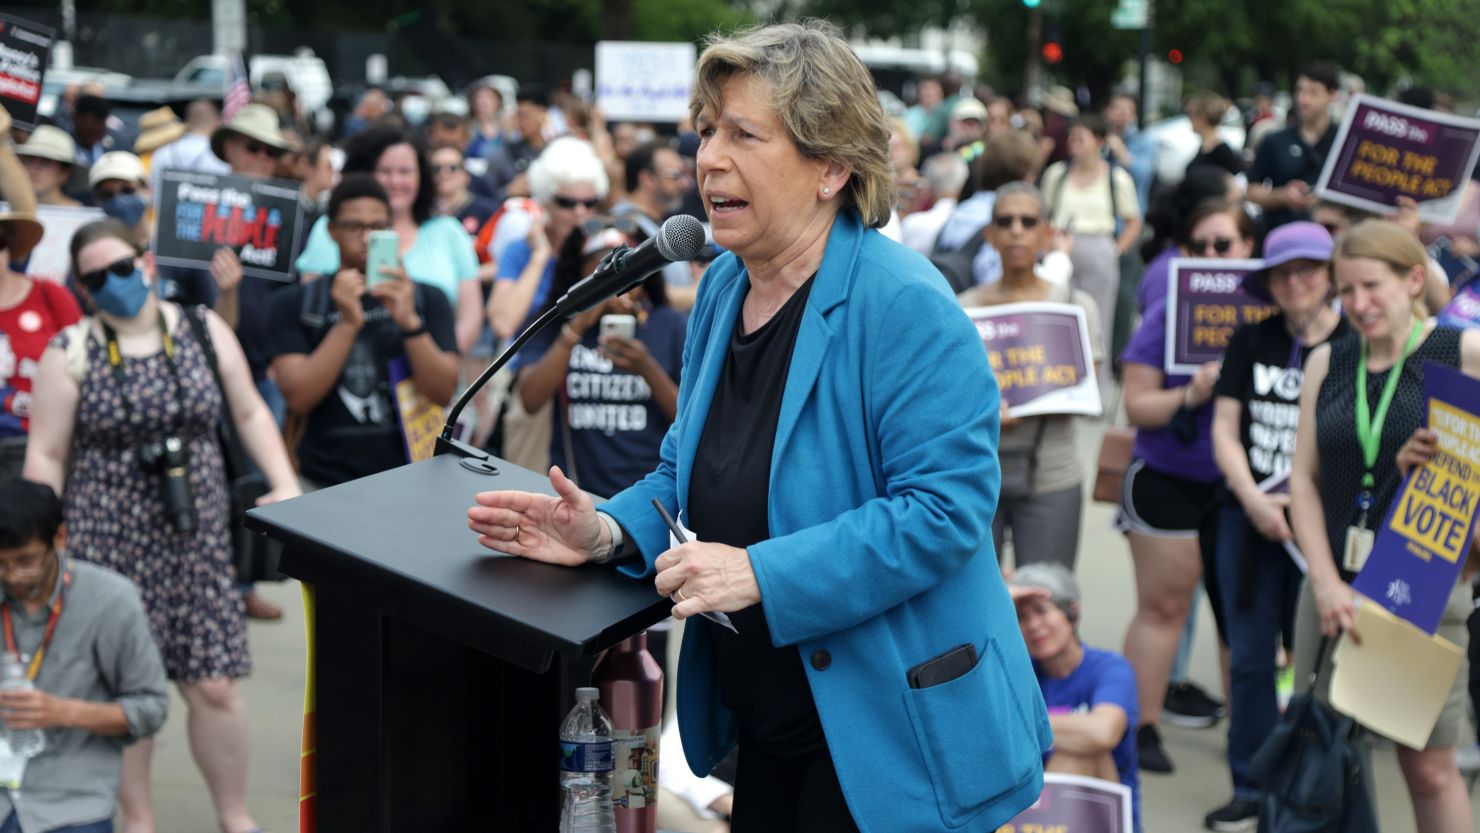 Randi Weingarten, president of the American Federation of Teachers, speaks during a rally in front of the US Supreme Court last month.